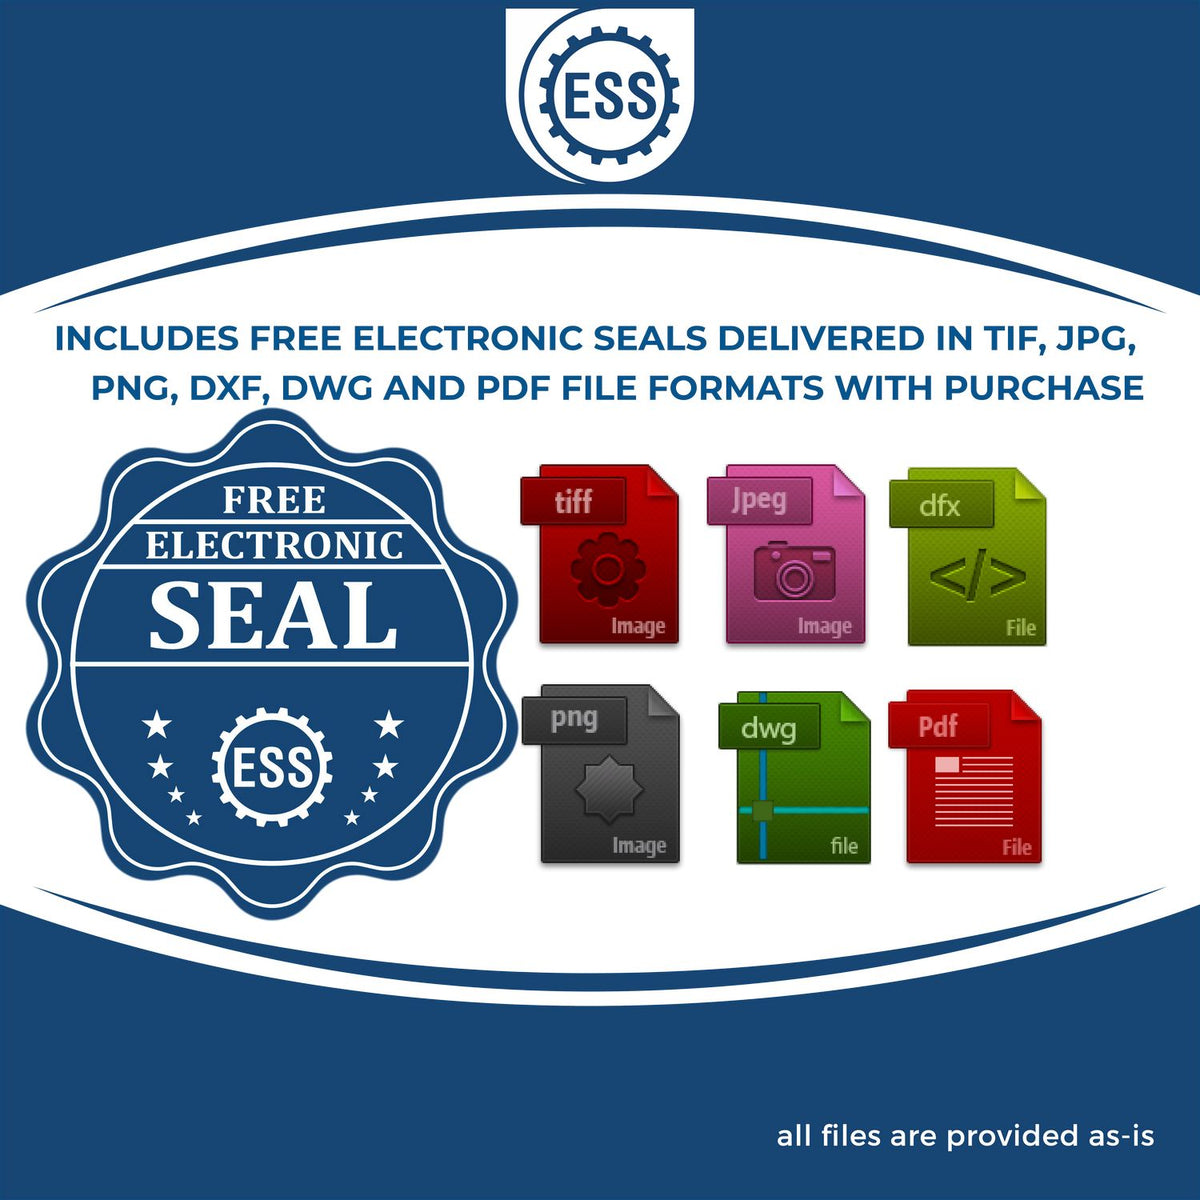 An infographic for the free electronic seal for the Soft Maryland Professional Geologist Seal illustrating the different file type icons such as DXF, DWG, TIF, JPG and PNG.